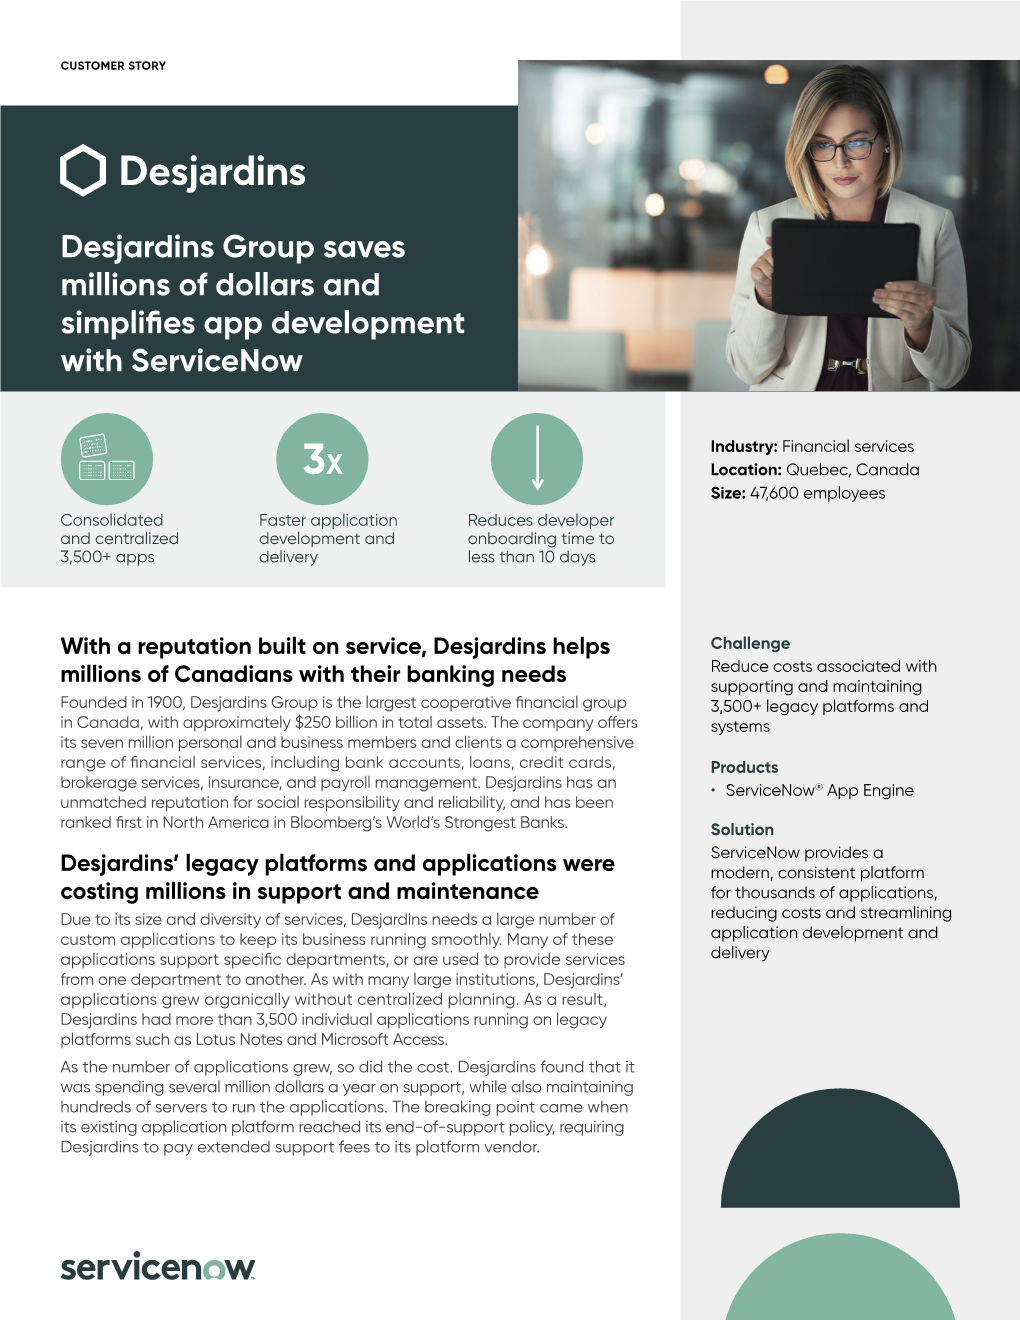 Desjardins Group Saves Millions of Dollars and Simplifies App Development with Servicenow